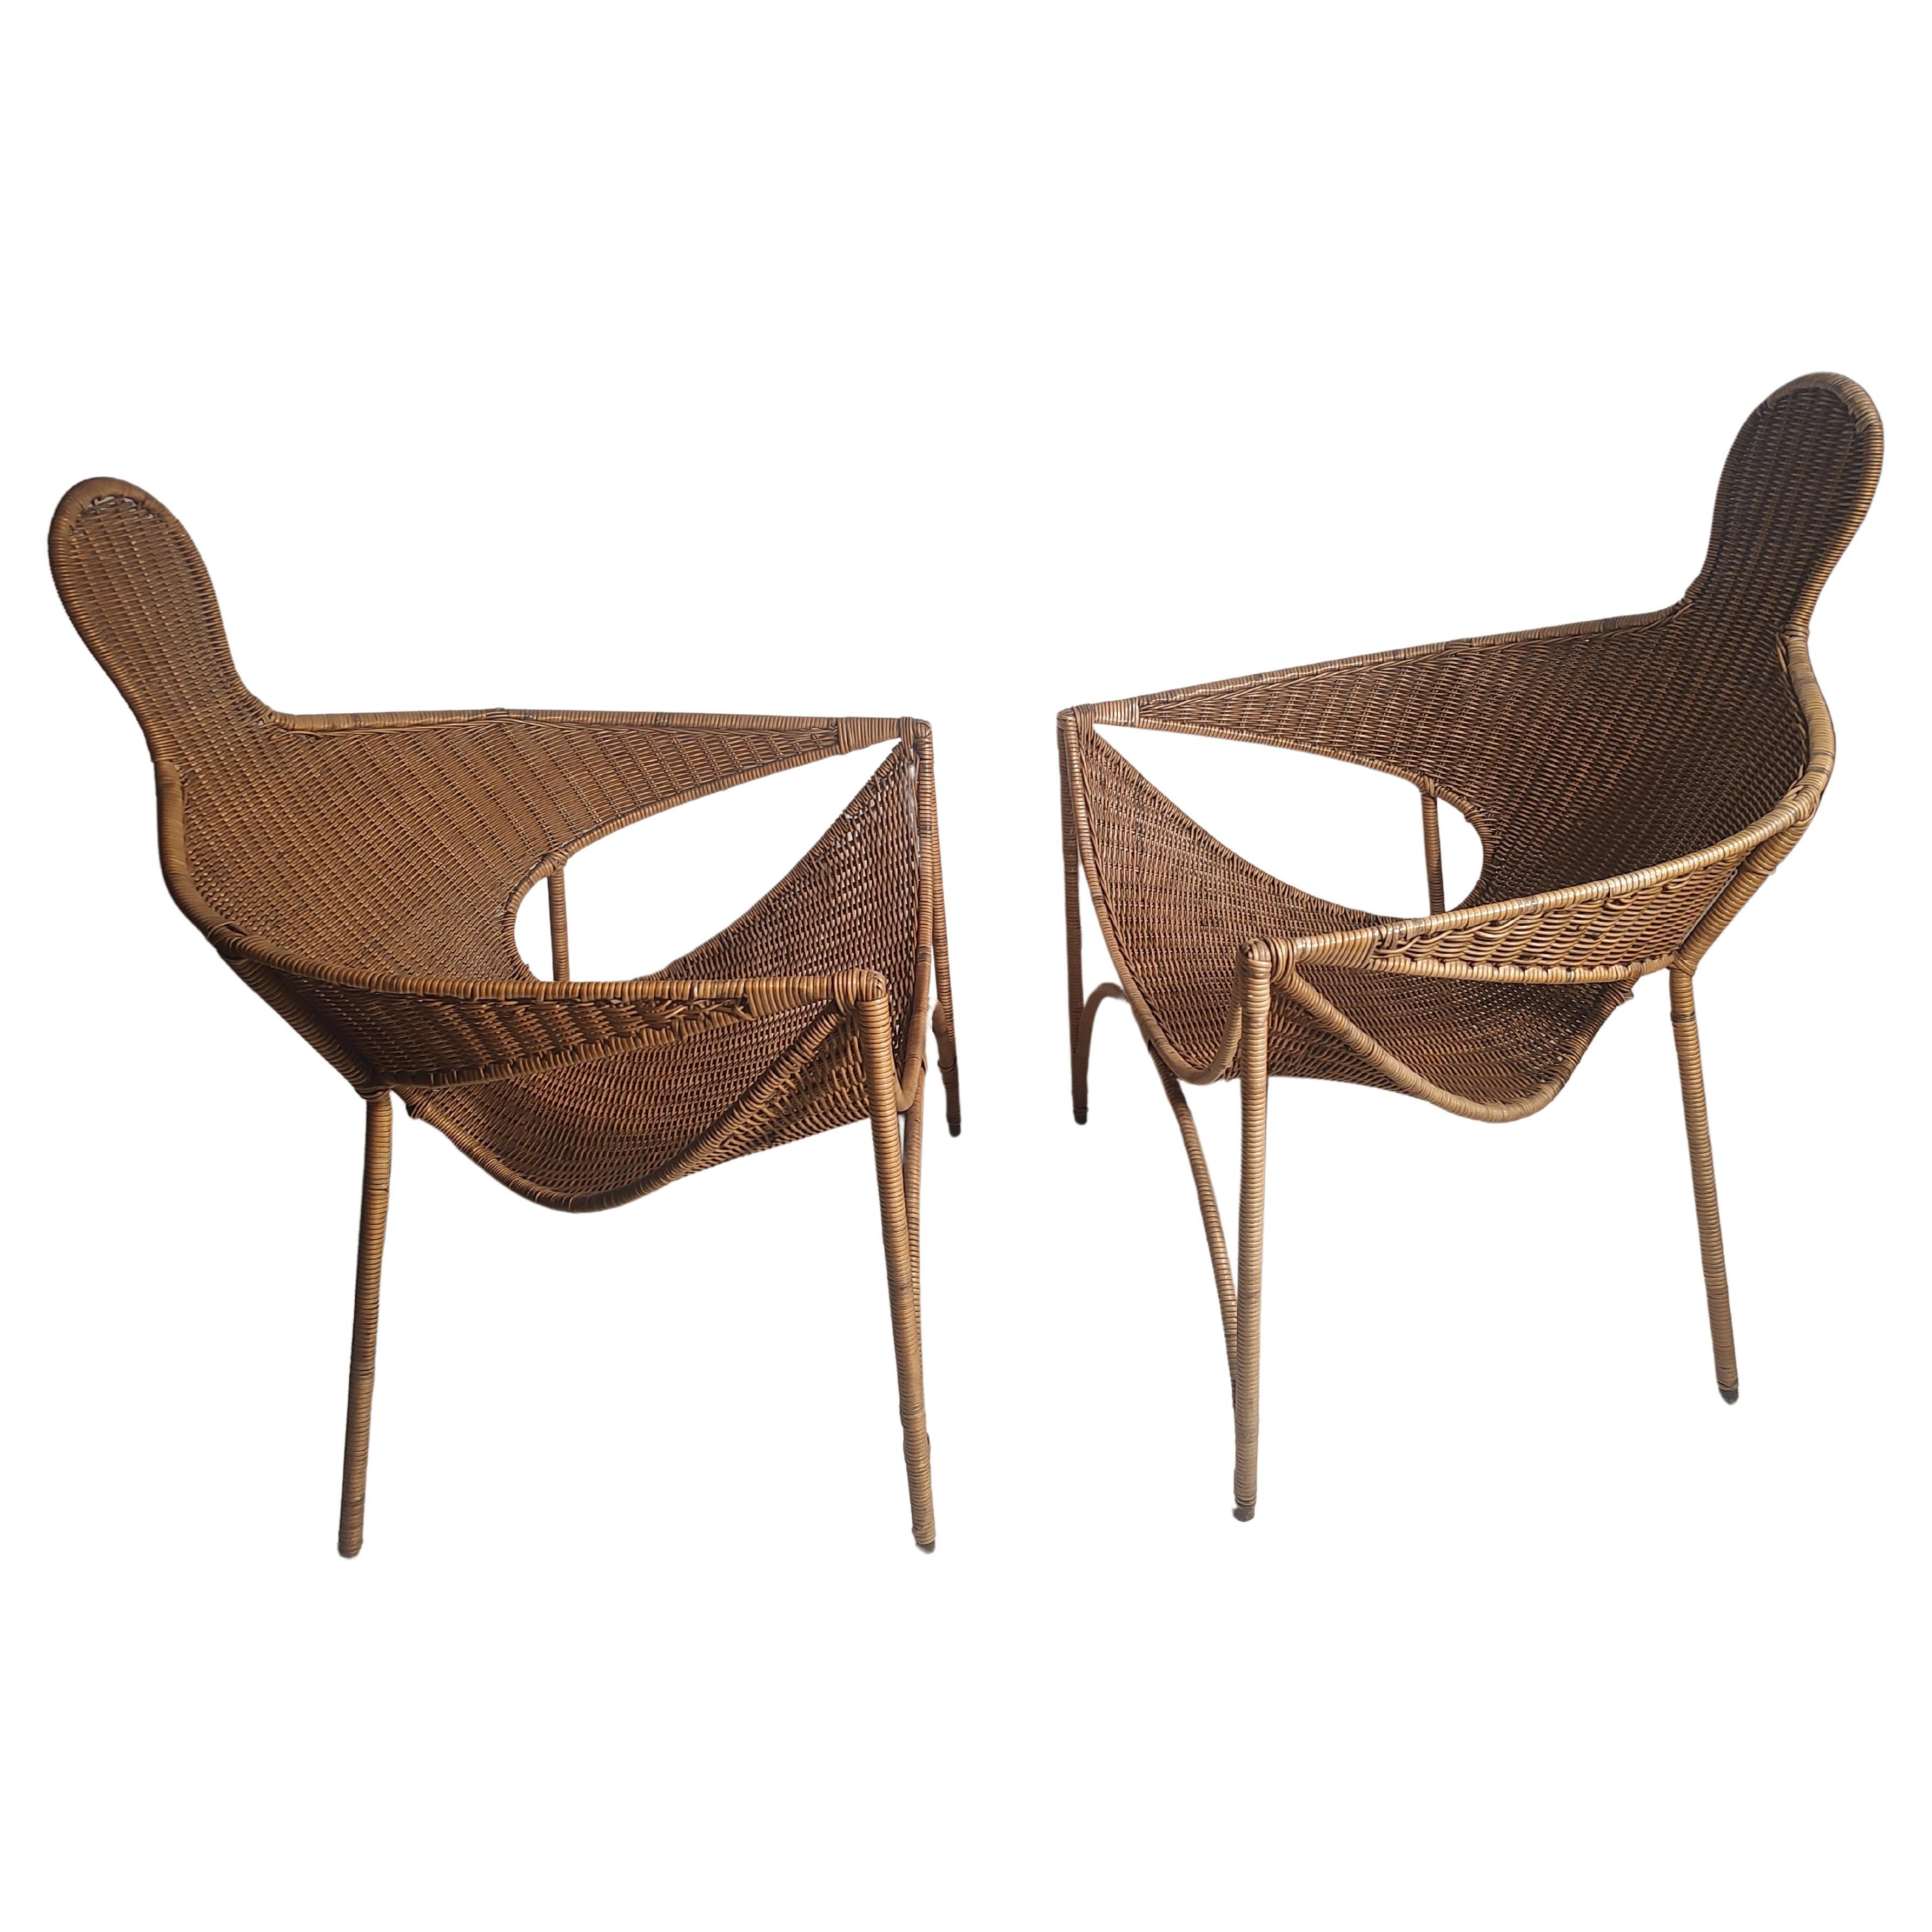 Pair of Mid Century Modern Sculptural Wicker & Iron Lounge Chairs Francis Mair  For Sale 2